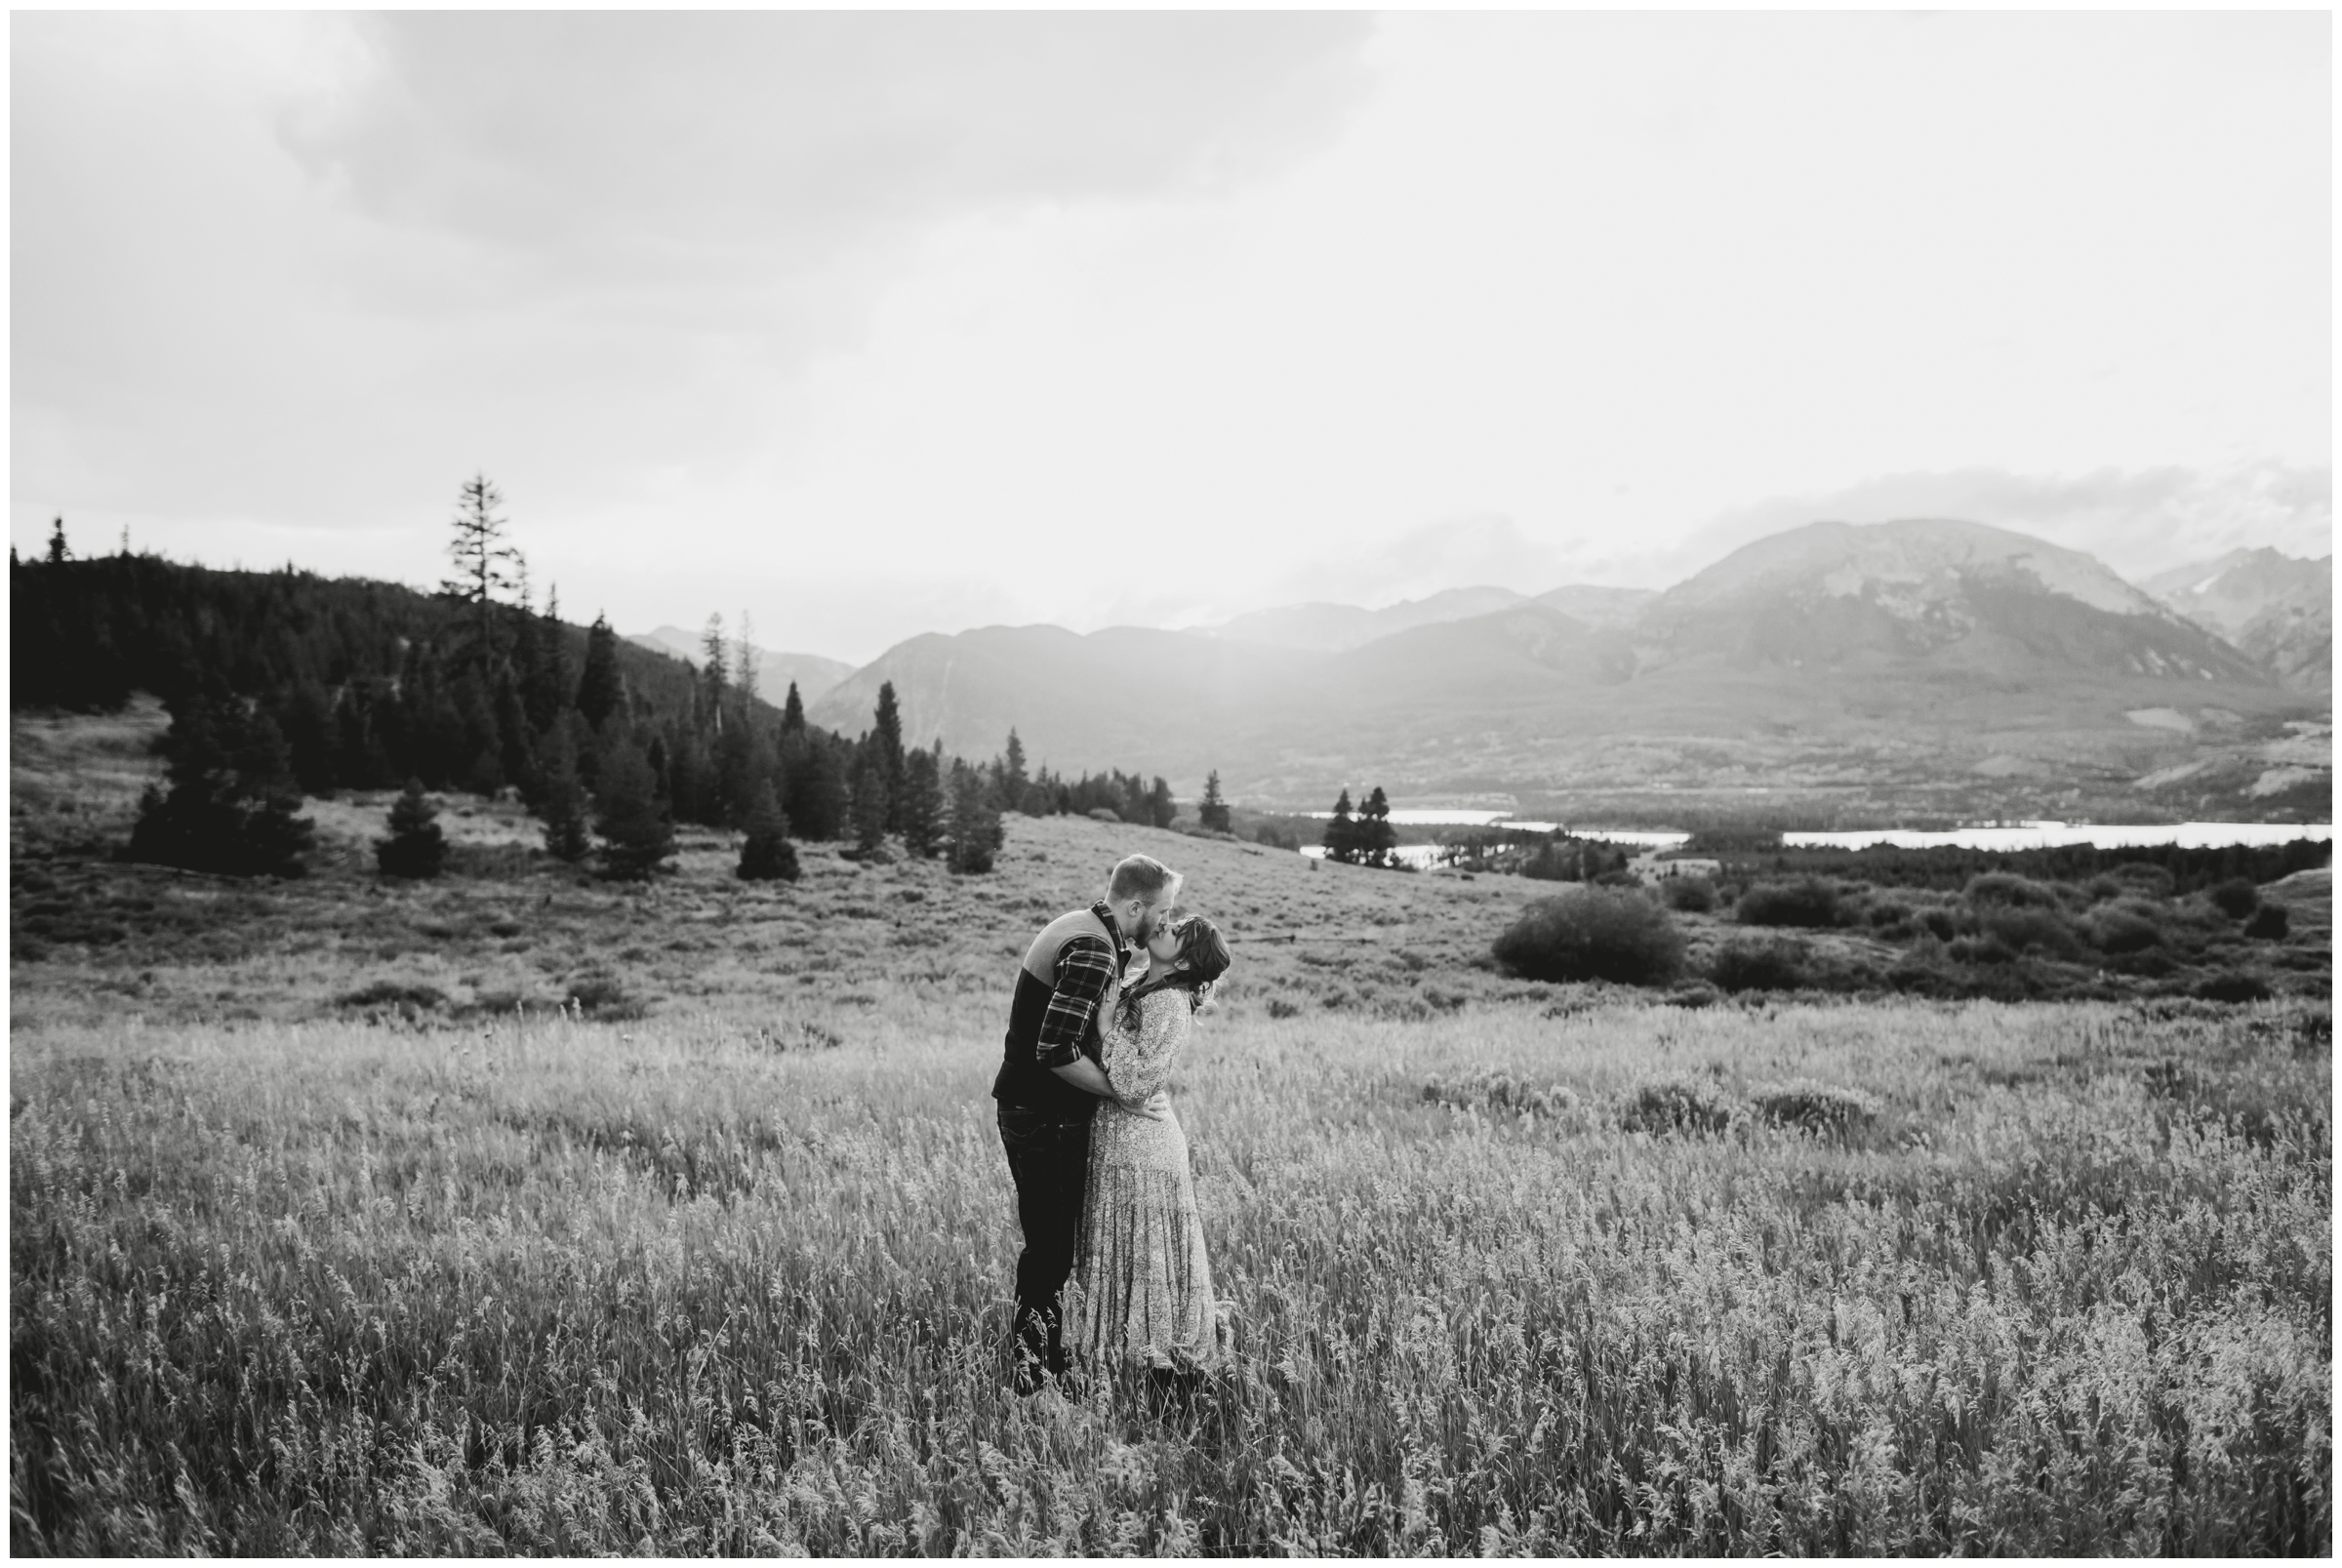 Fall Breckenridge Colorado engagement photos at Sapphire Point and Windy Point Campground by mountain photographer Plum Pretty Photography